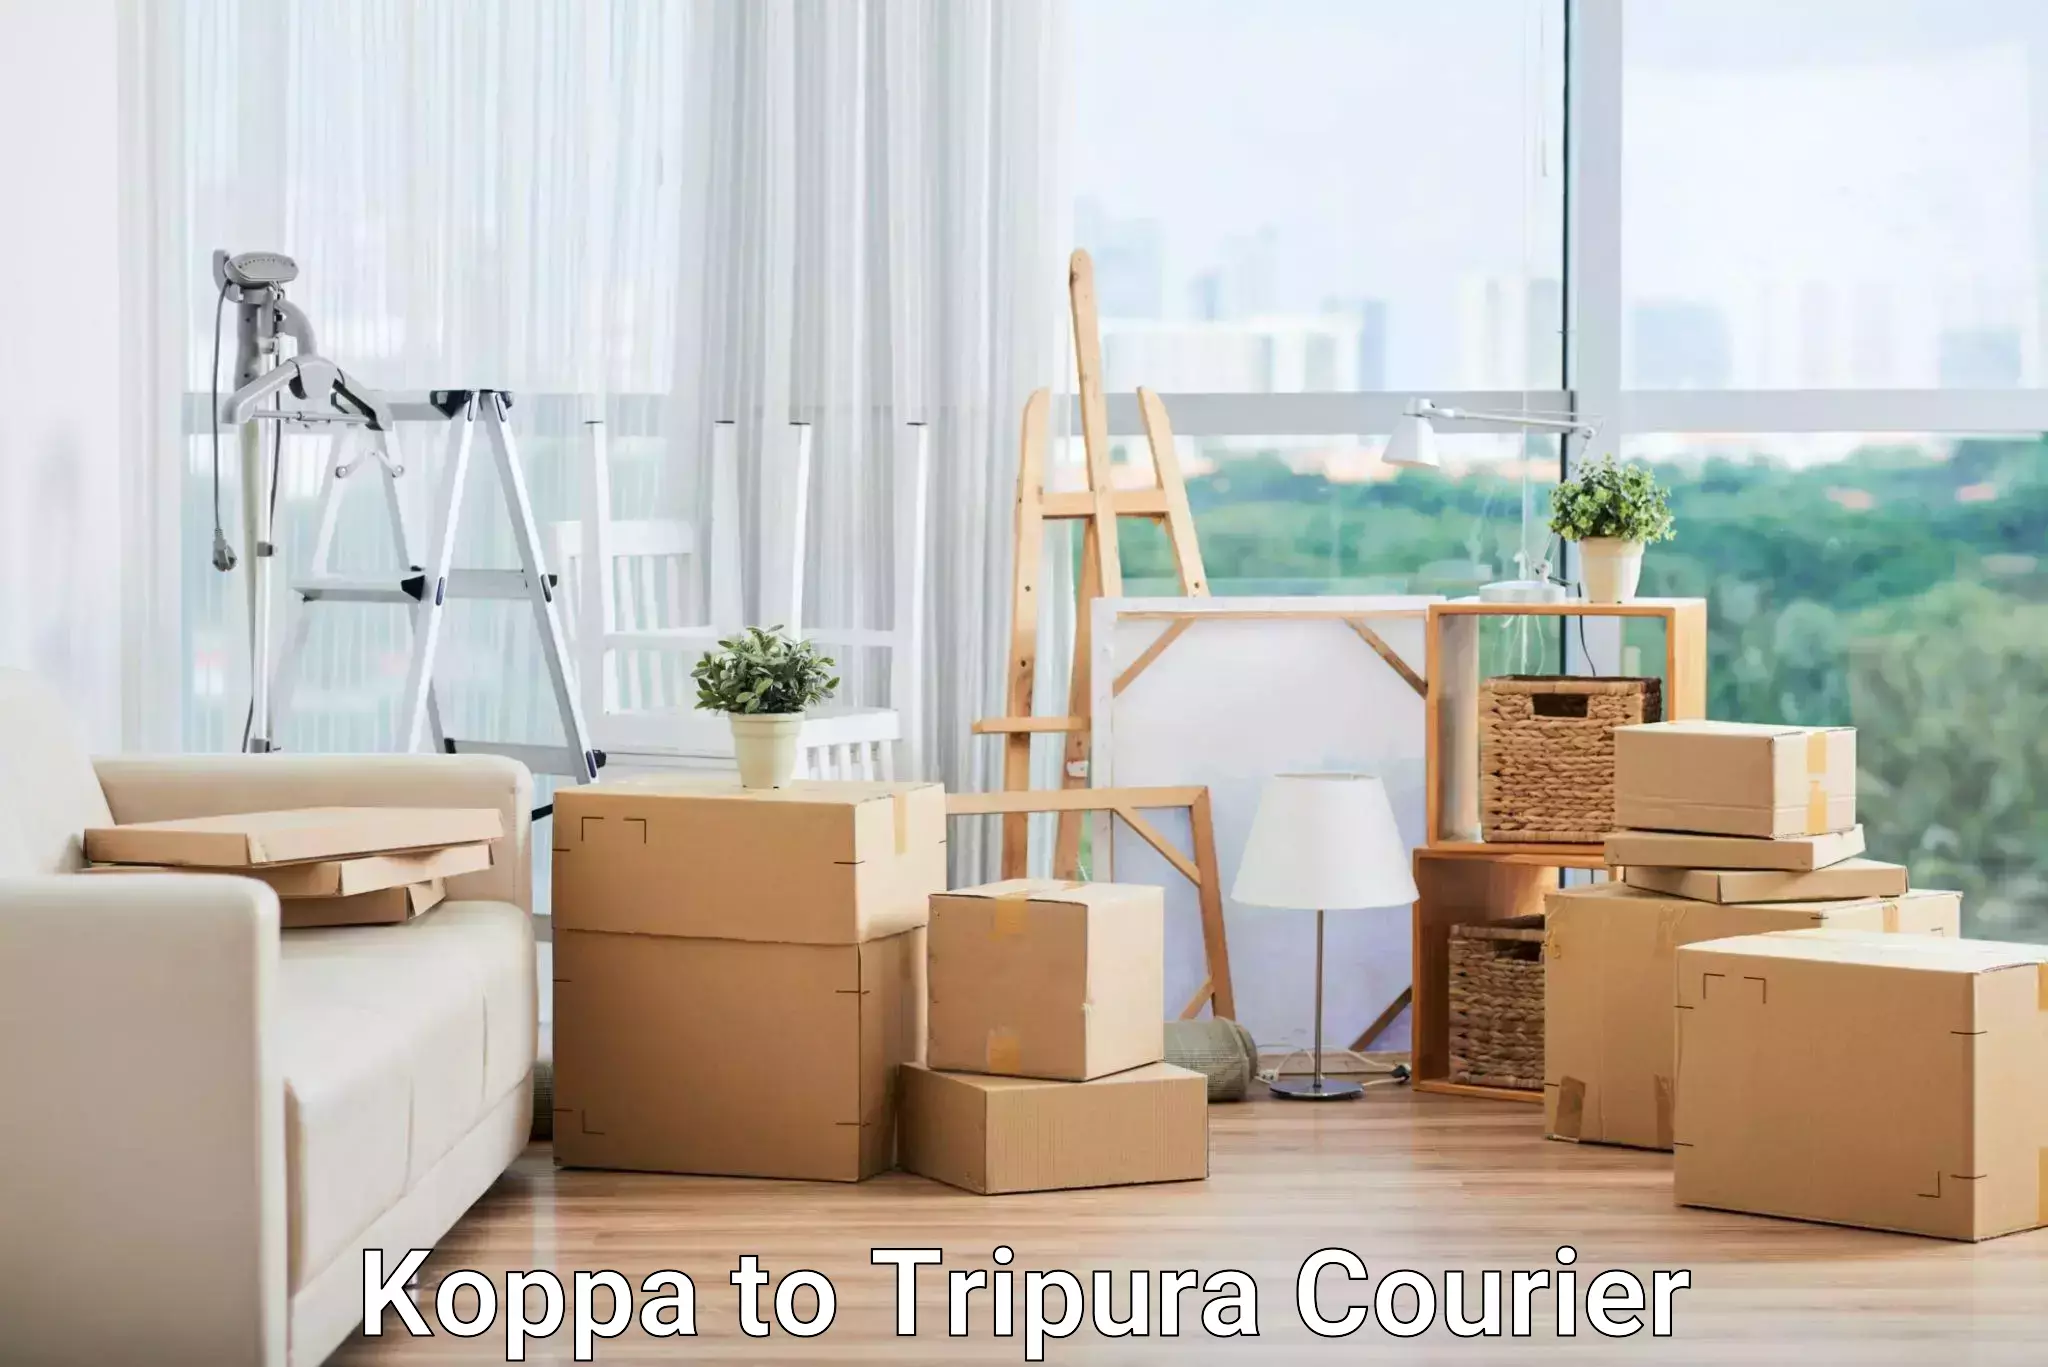 Full-service courier options Koppa to Udaipur Tripura